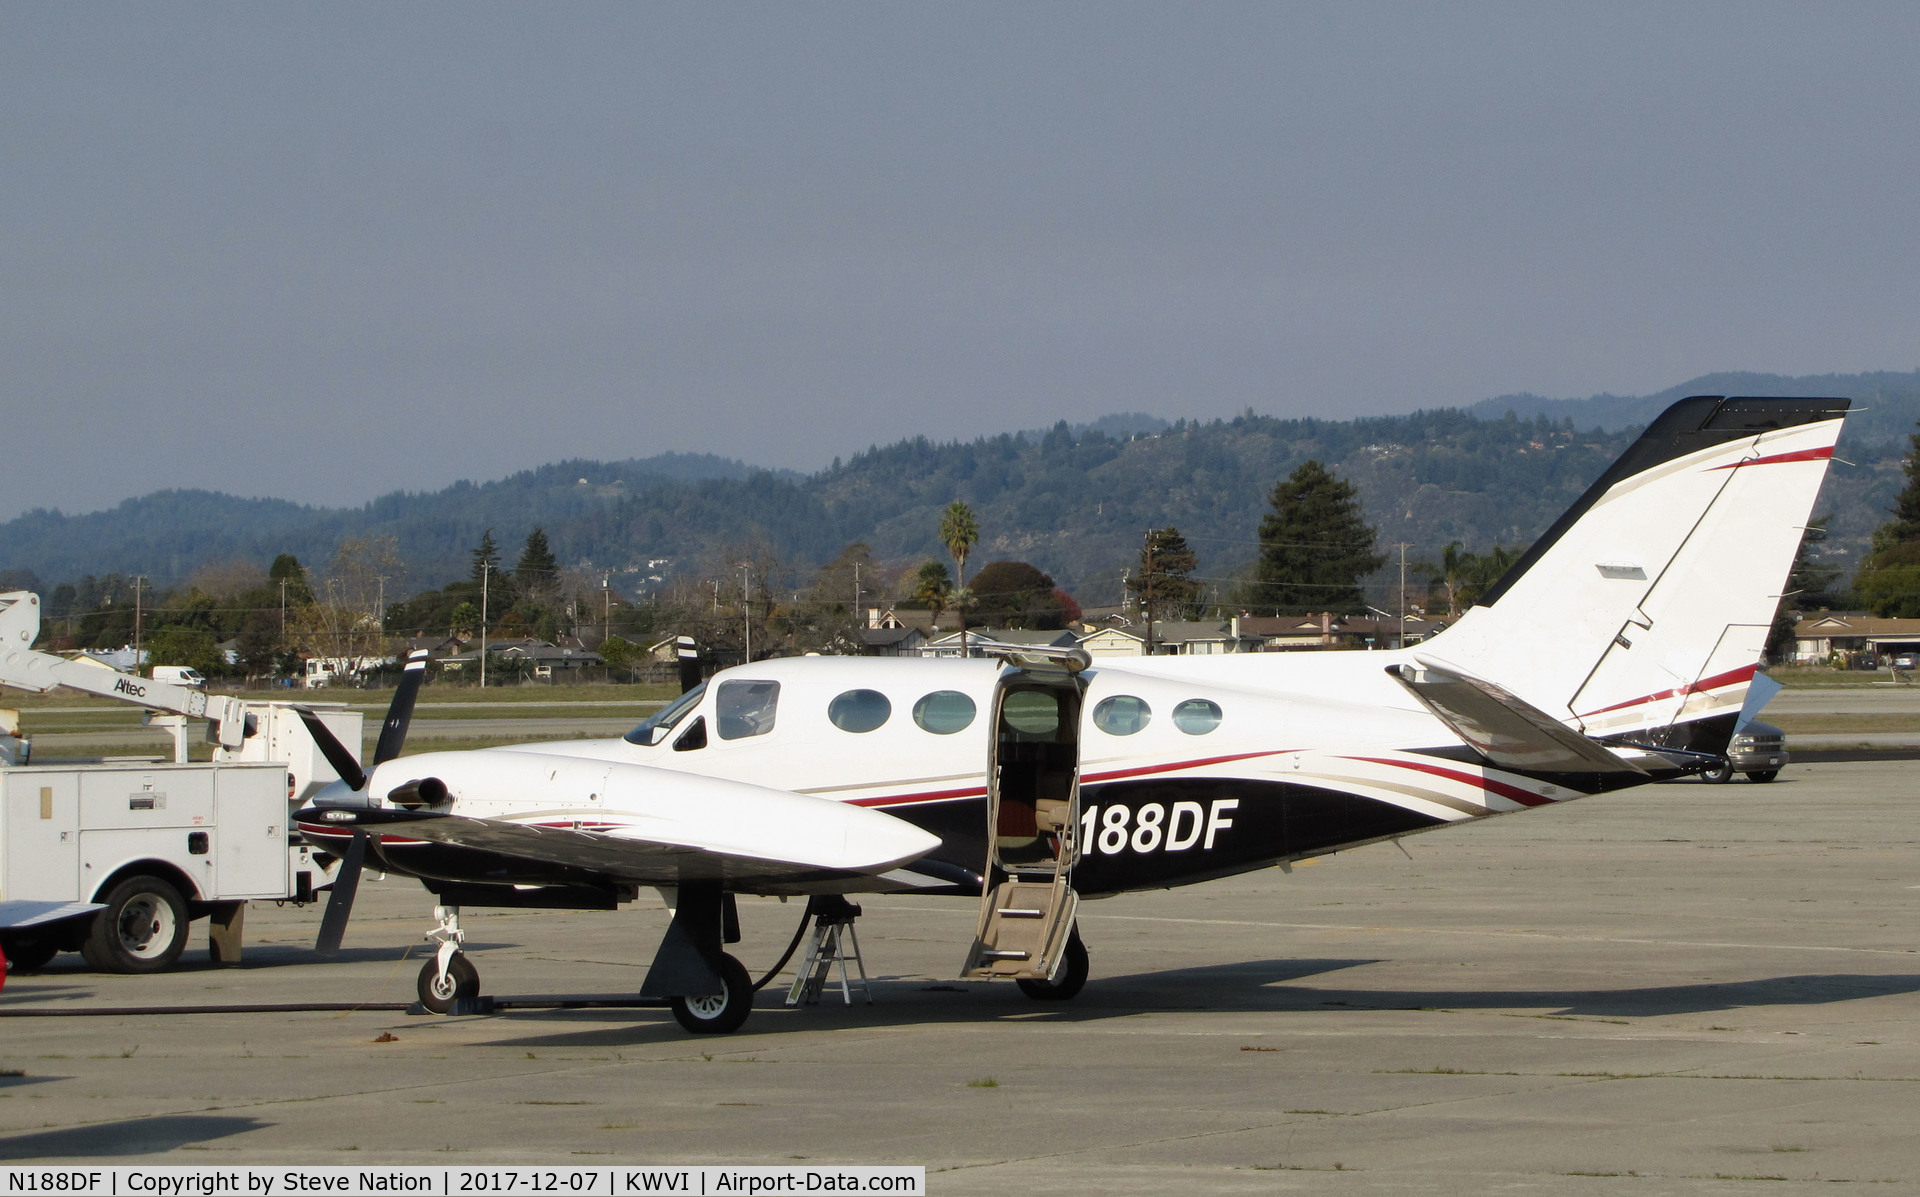 N188DF, 1984 Cessna 425 Conquest I C/N 425-0188, San Bernardino County-based 1984 Cessna 425 Conquest in new colors visiting @ Watsonville Municipal Airport, CA